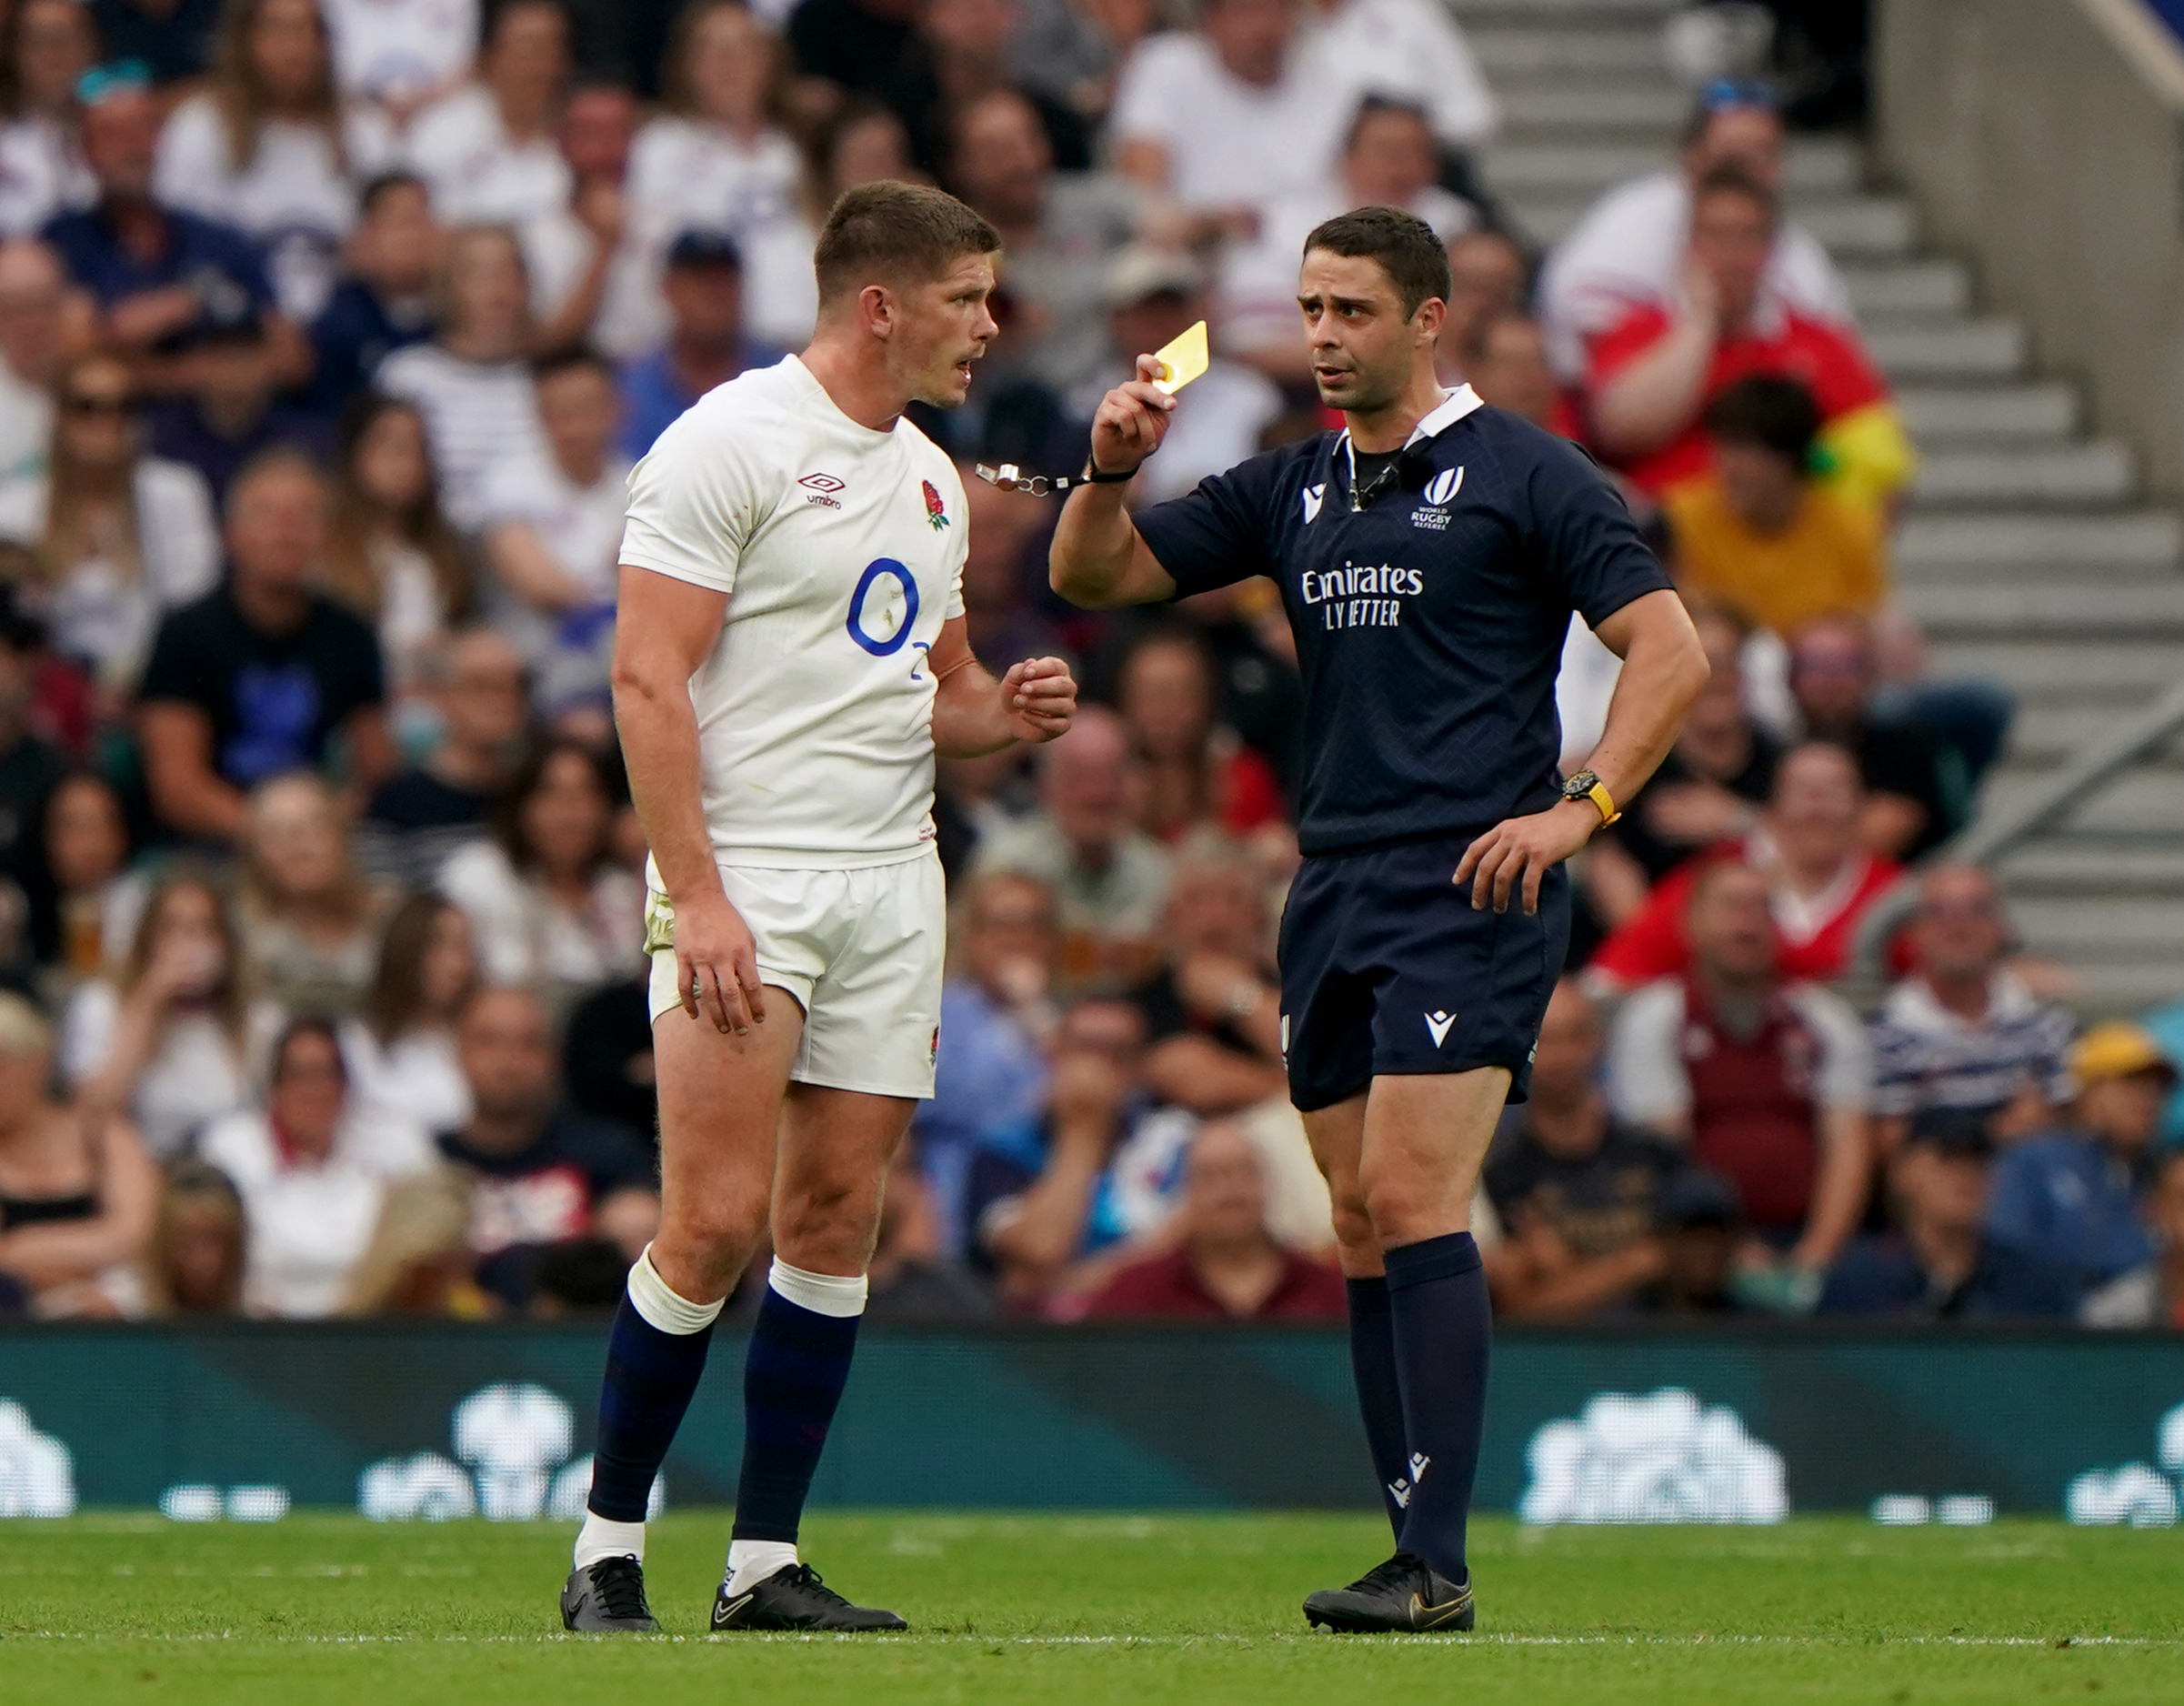 Owen Farrell was shown a yellow card against Wales that was upgraded to a red